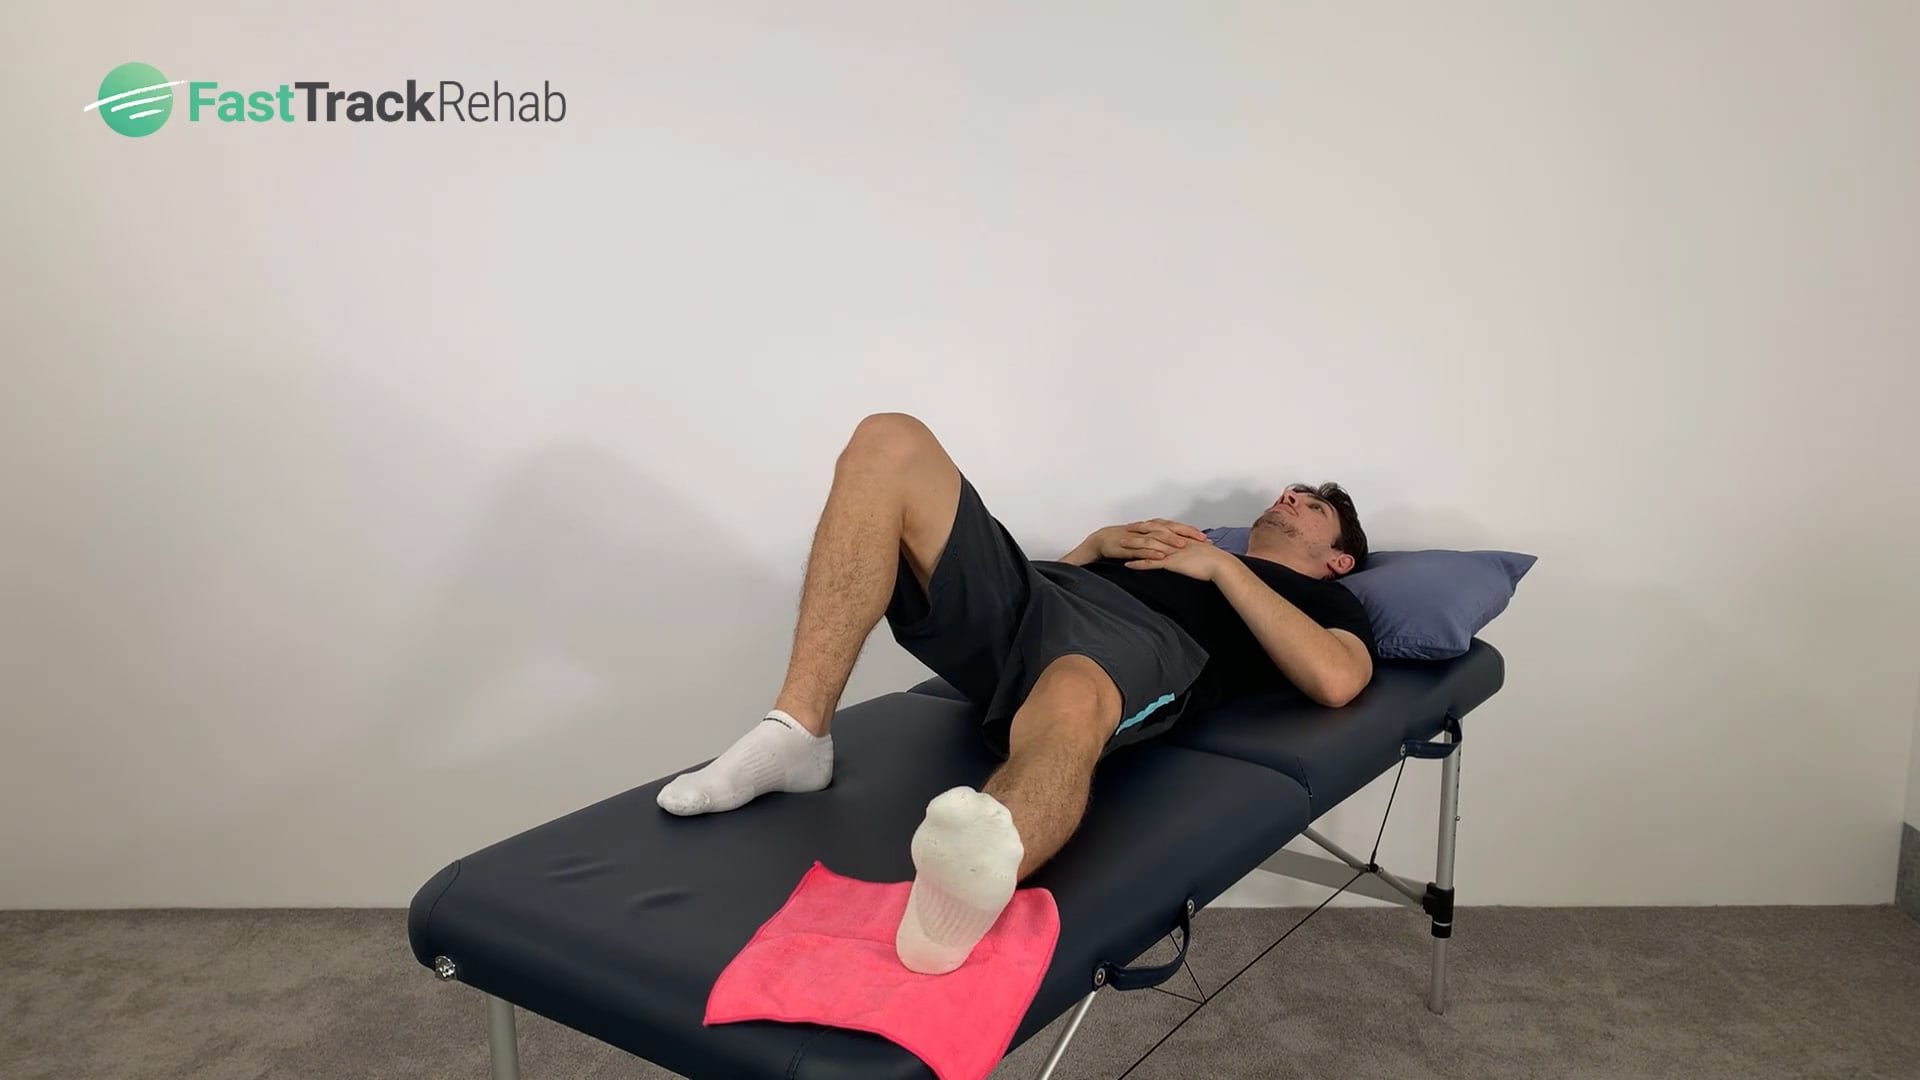 Supine Hip Abduction (ankle) on Vimeo